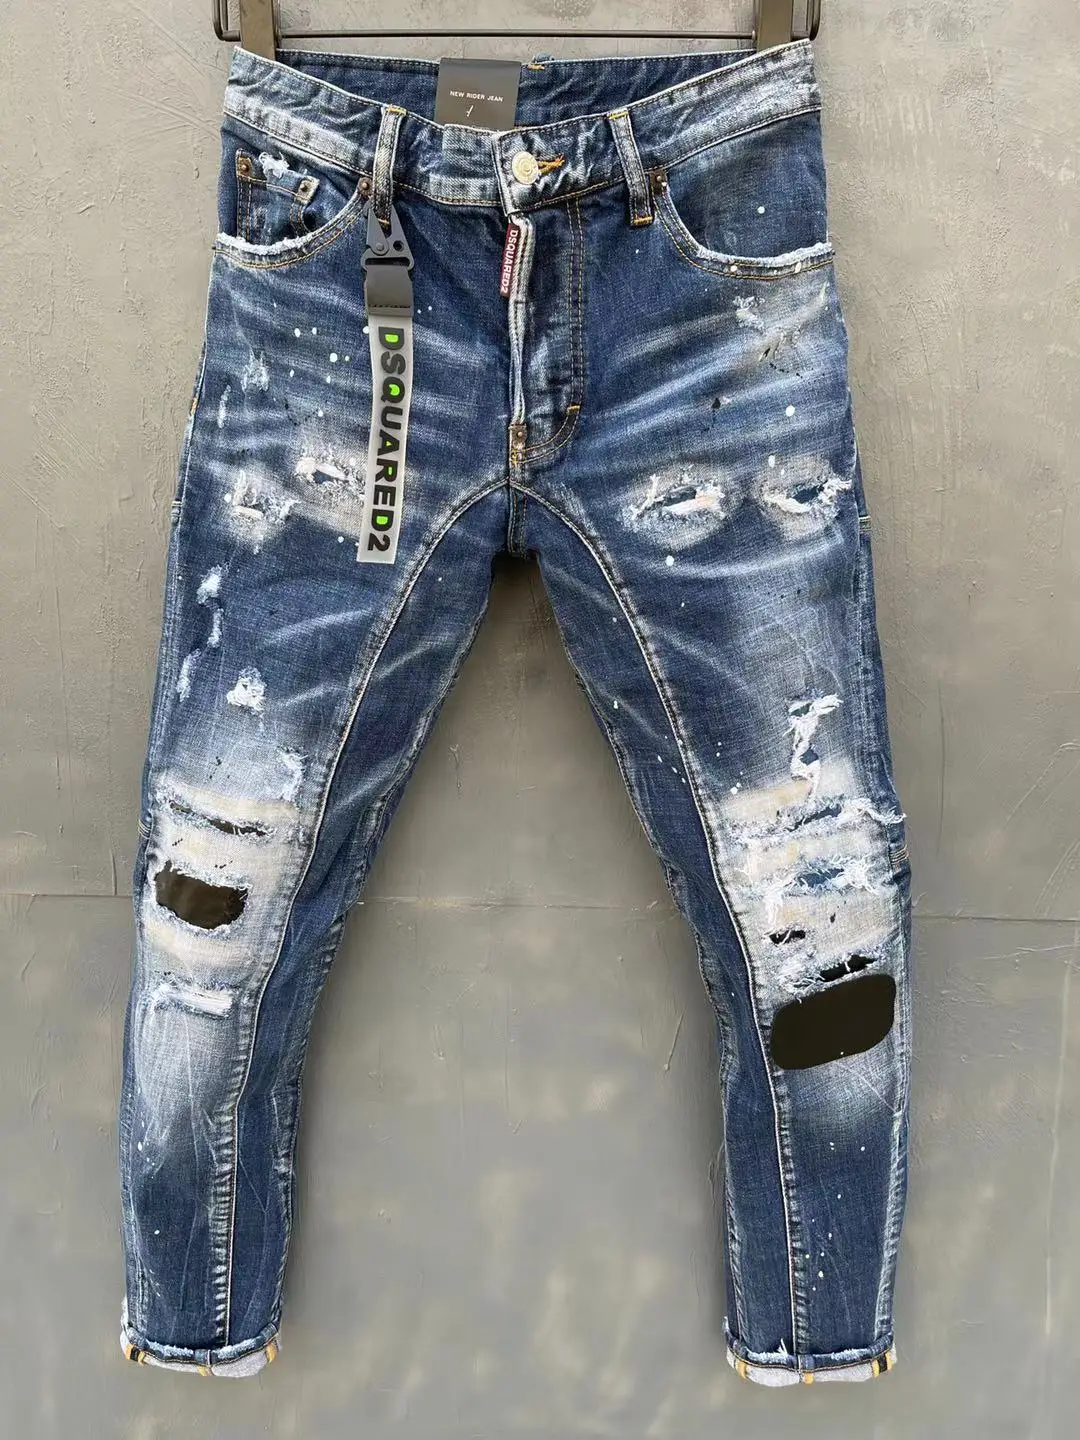 

New DSQUARED2 Men's/Women's Ripped Splicing Jeans, Fashion Washed Frayed Patch, Paint Made Old Stretch Pants